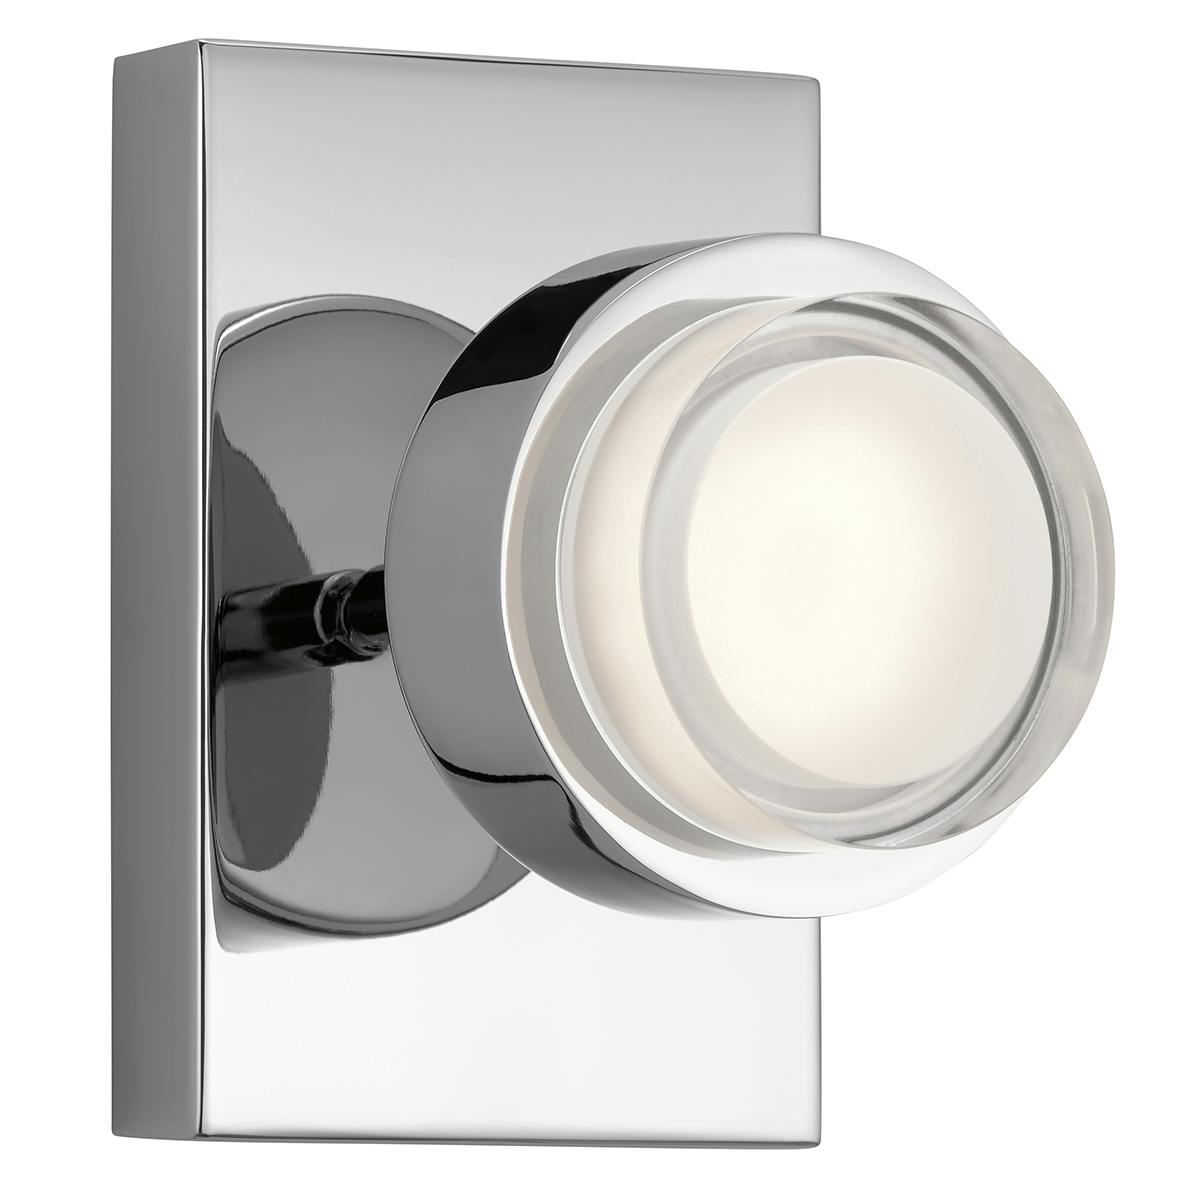 Harlaw 3000K LED 1 Light Sconce Chrome hung vertically on a white background